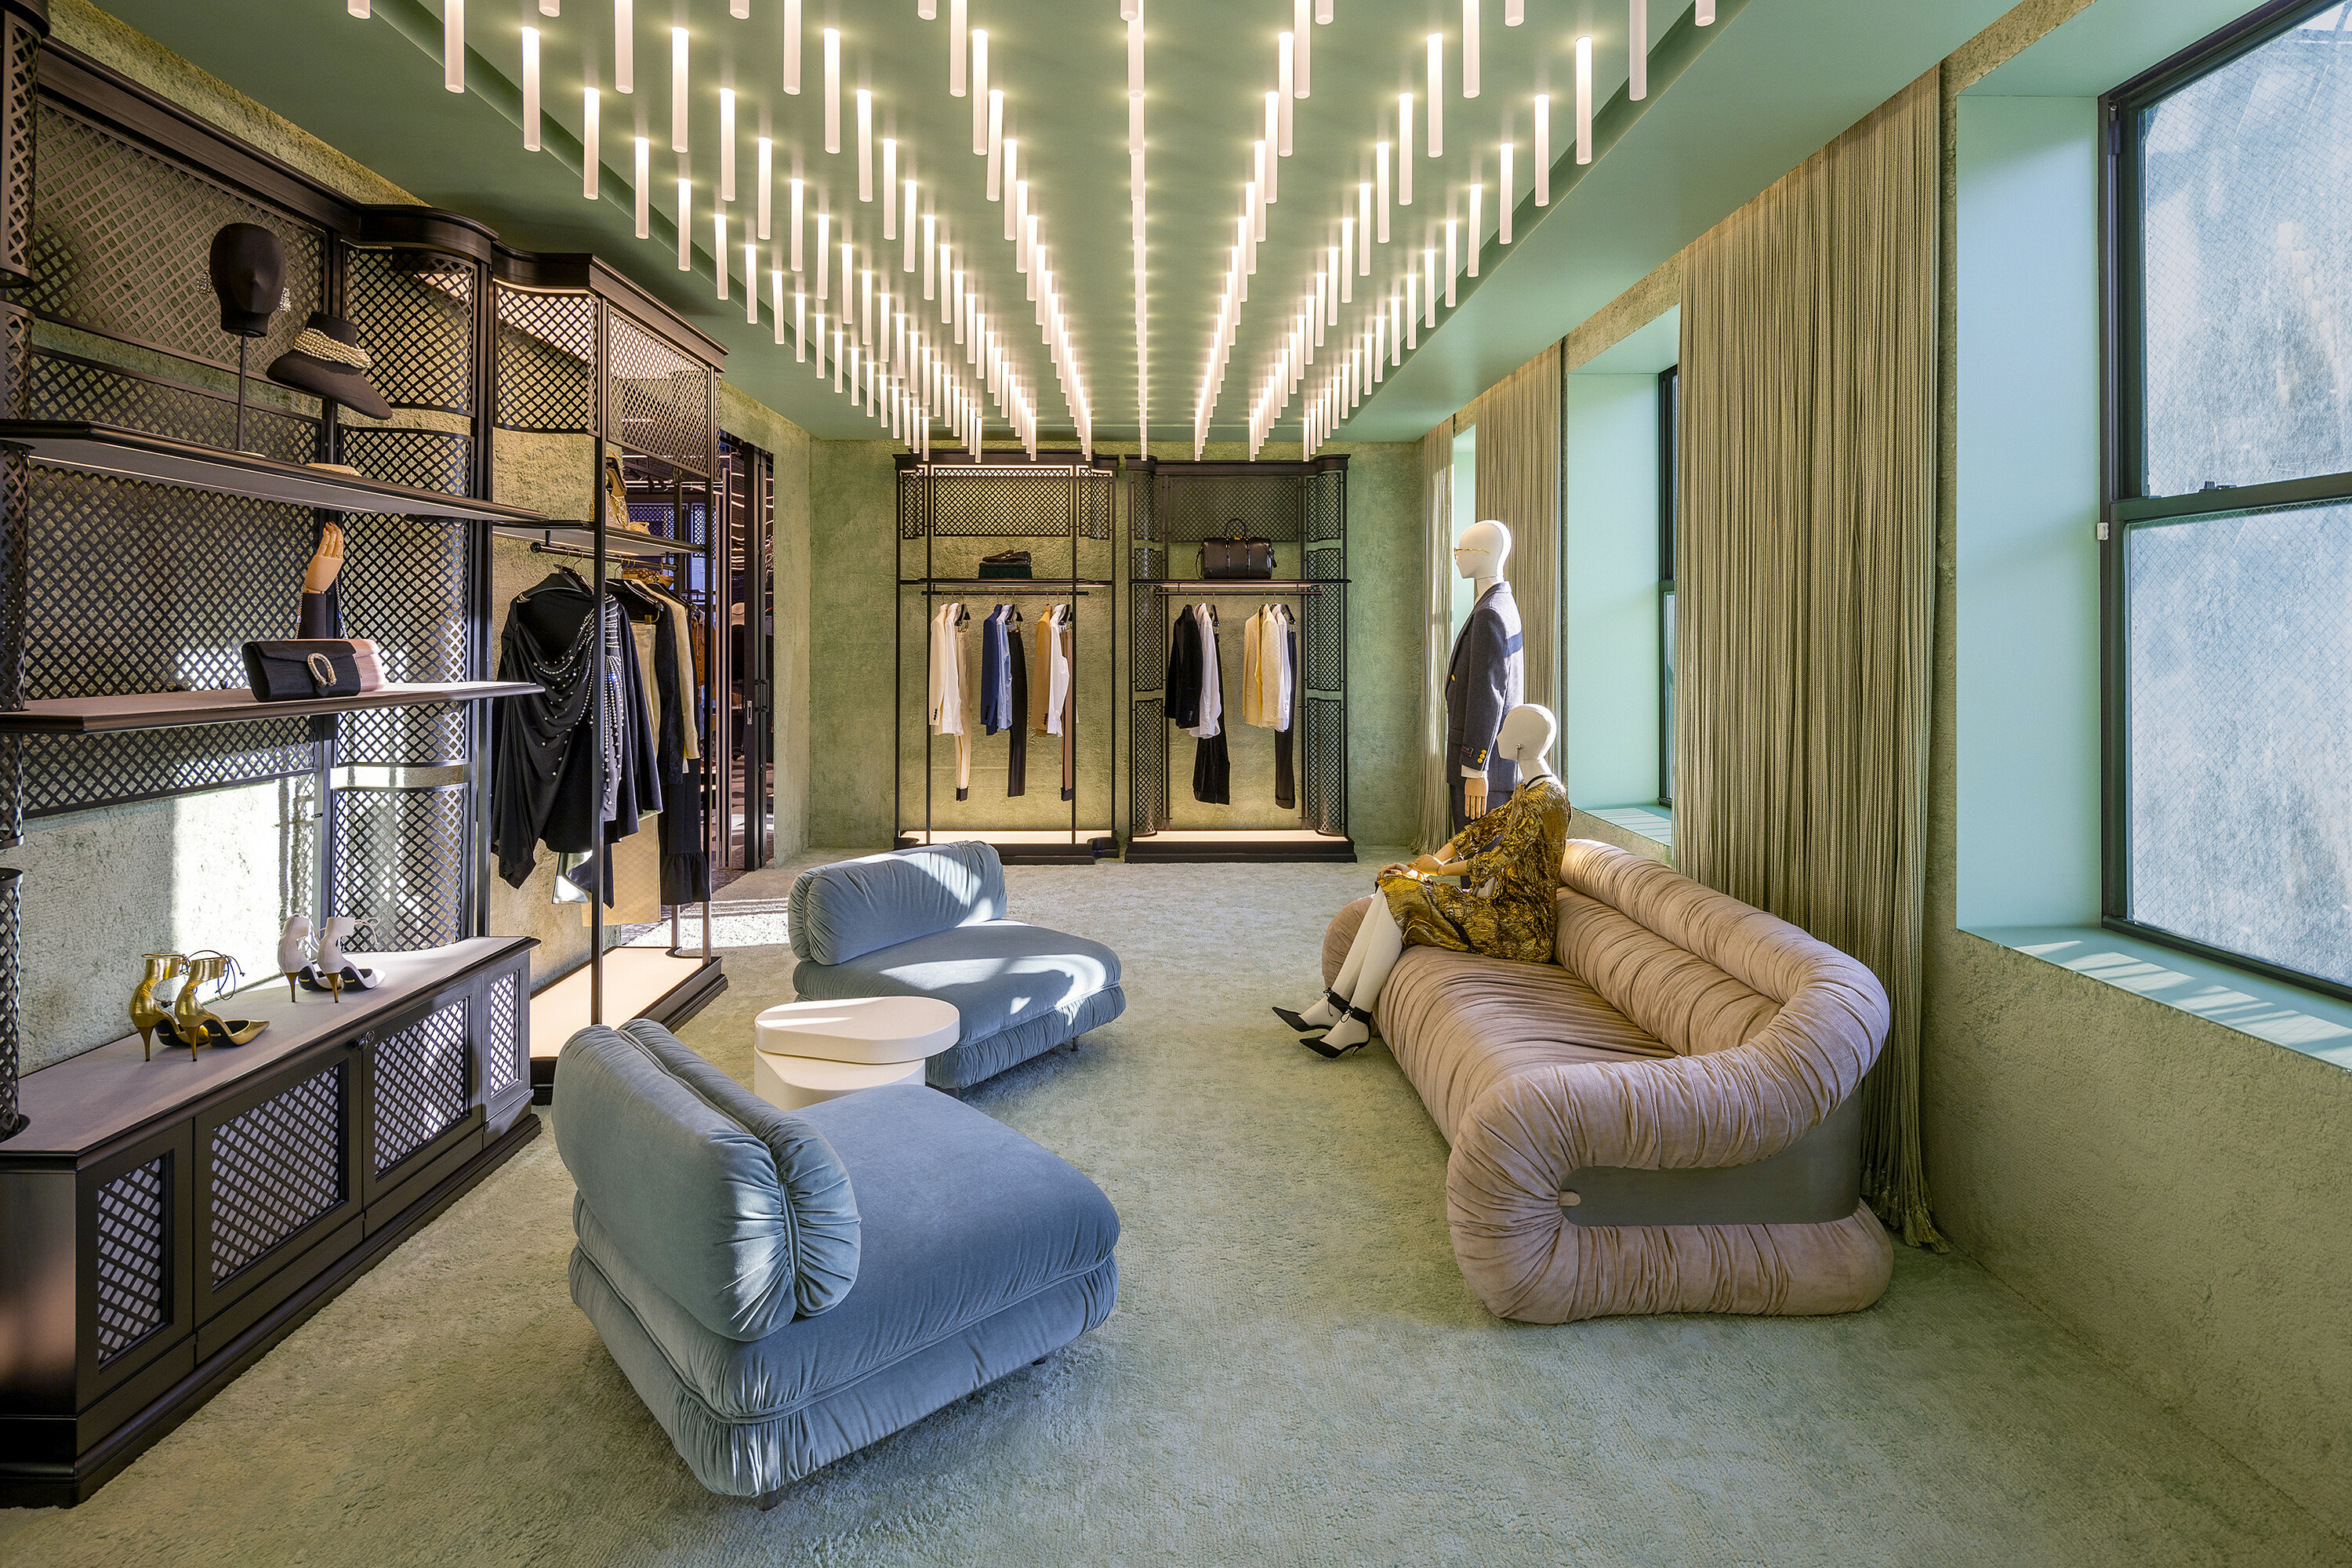 Brown Thomas on X: Step inside the new Gucci Boutique. ⁠⁠Designed